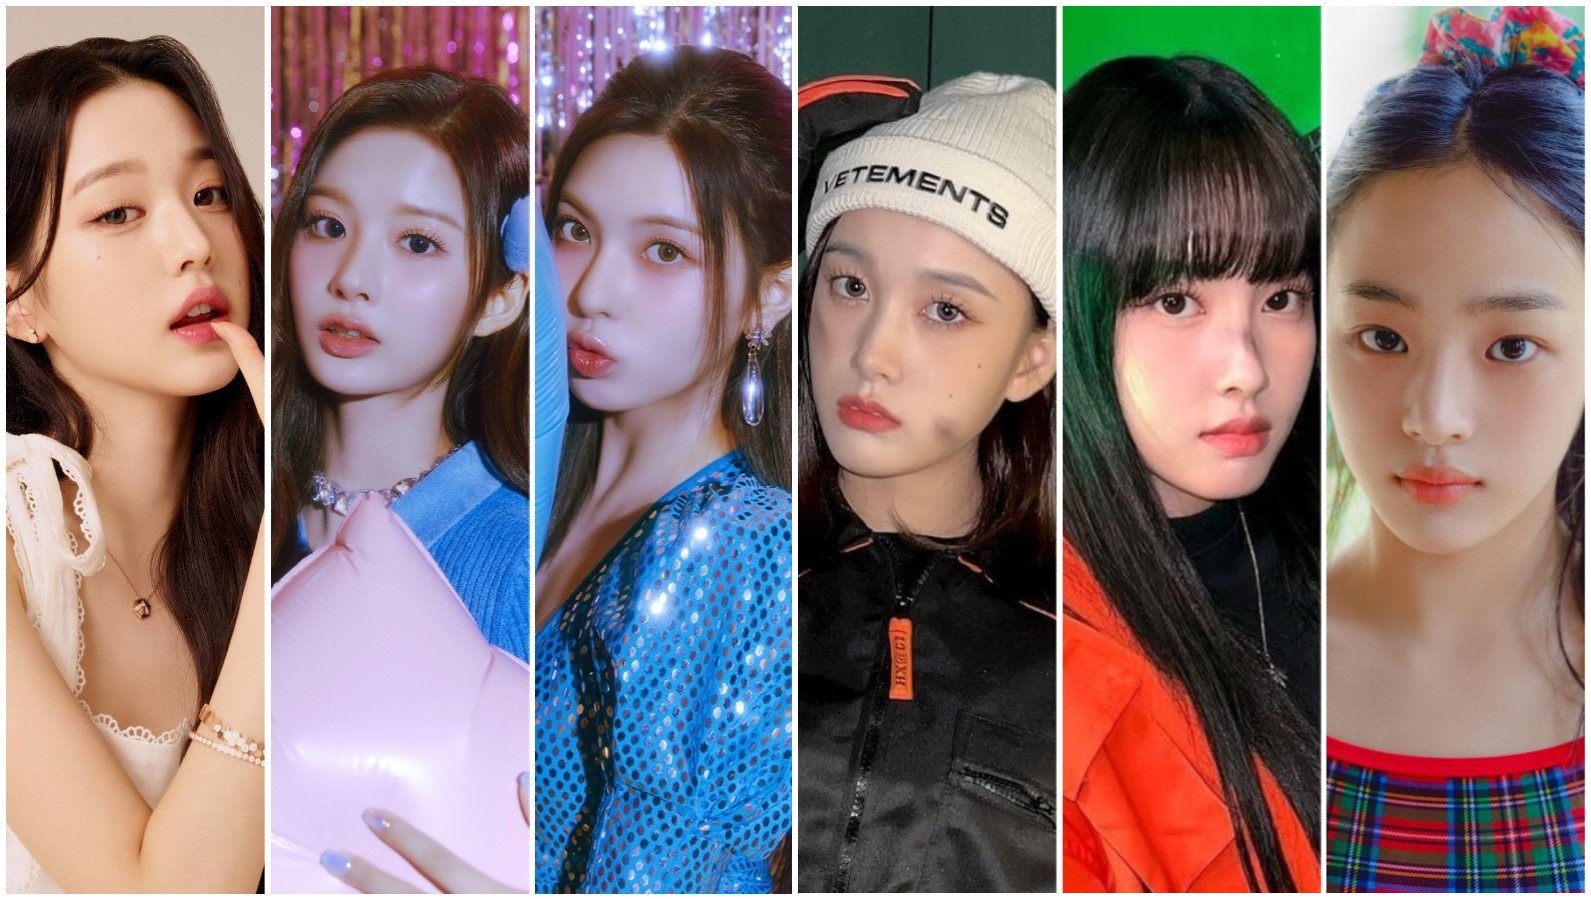 (Left to right) Wonyoung, Sullyoon, Bae, J, Yoon, Minji and other K-pop idols gave up university for fame this year ... but was it worth it? Photos: @for_everyoung10, @nmixx_official, @stayc_highup, @newjeans_official/Instagram